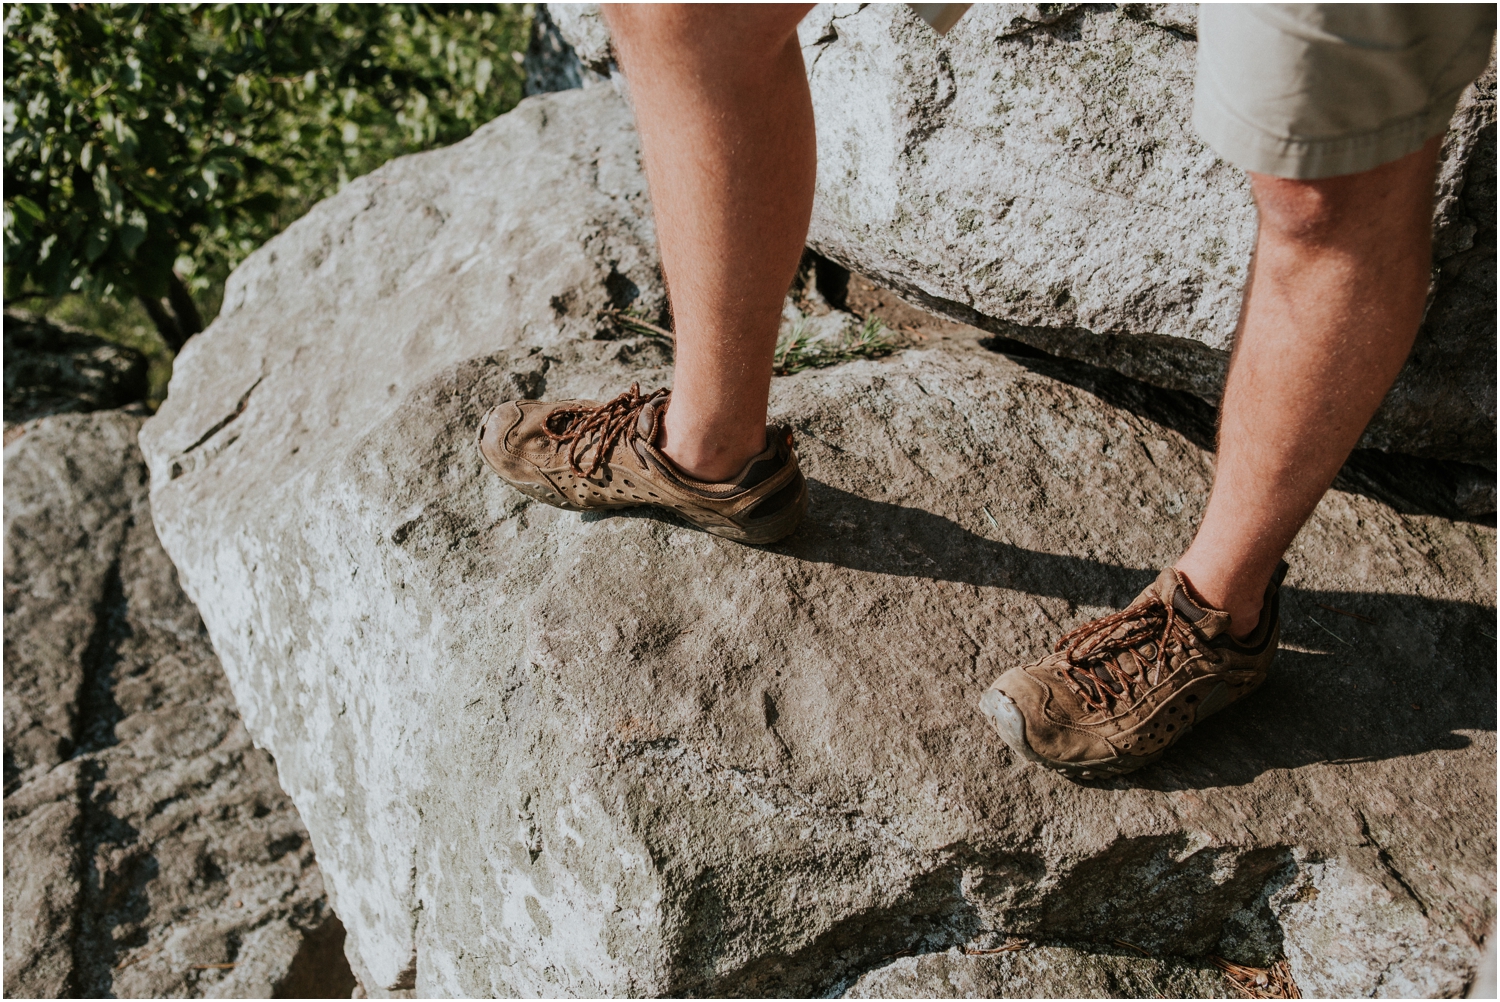 katy-sergent-photography-proposal-appalachian-trail-annapolis-rocks-adventurous-wedding-couples-intimate-elopement-hiking-backpacking-camping-photographer-johnson-city-tn-northeast-tennessee_0014.jpg